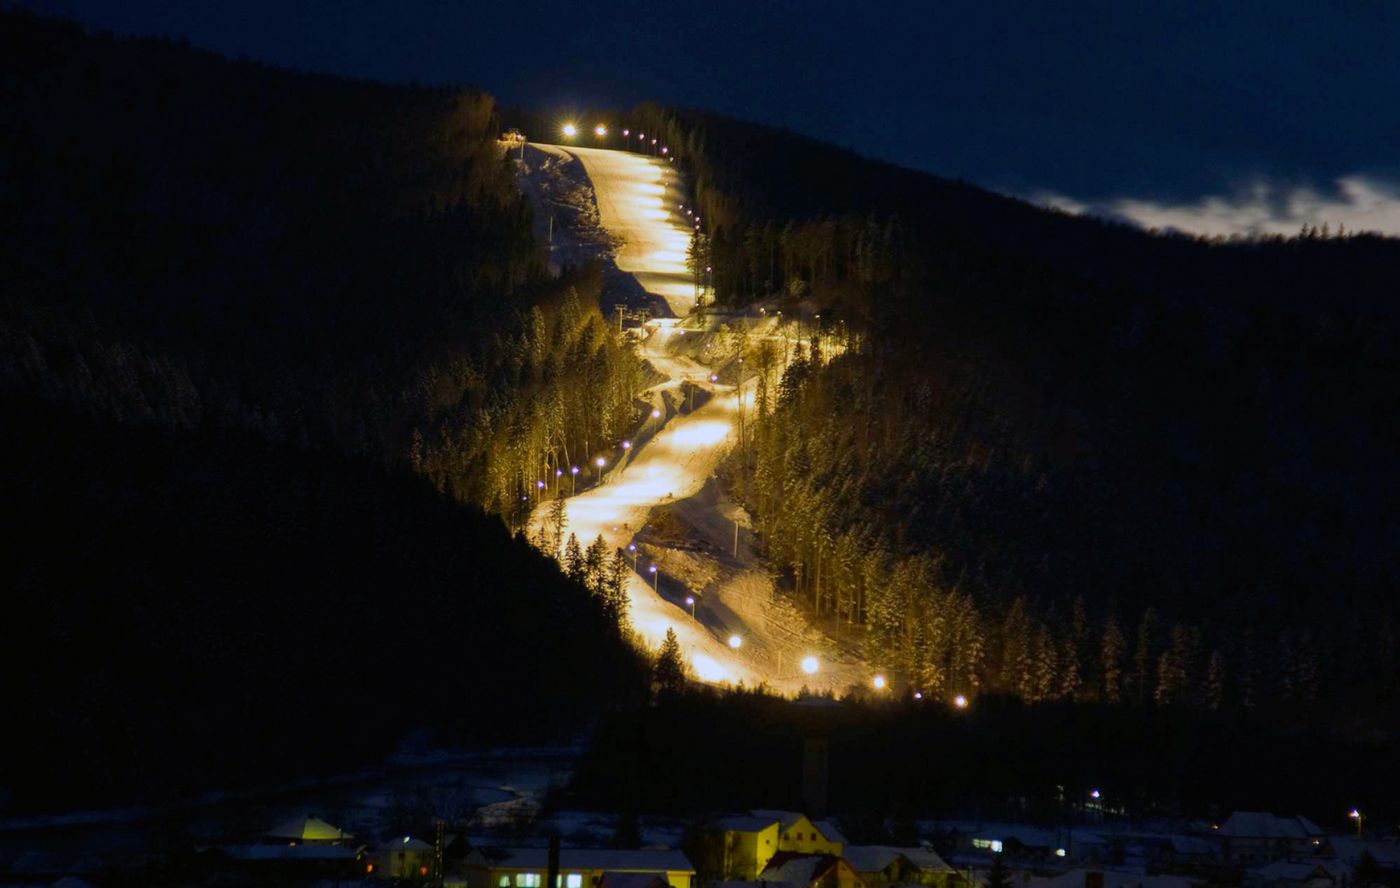 Photo: view of an illuminated ski slope by night; surrounded by forest; in the background, a dark blue night sky